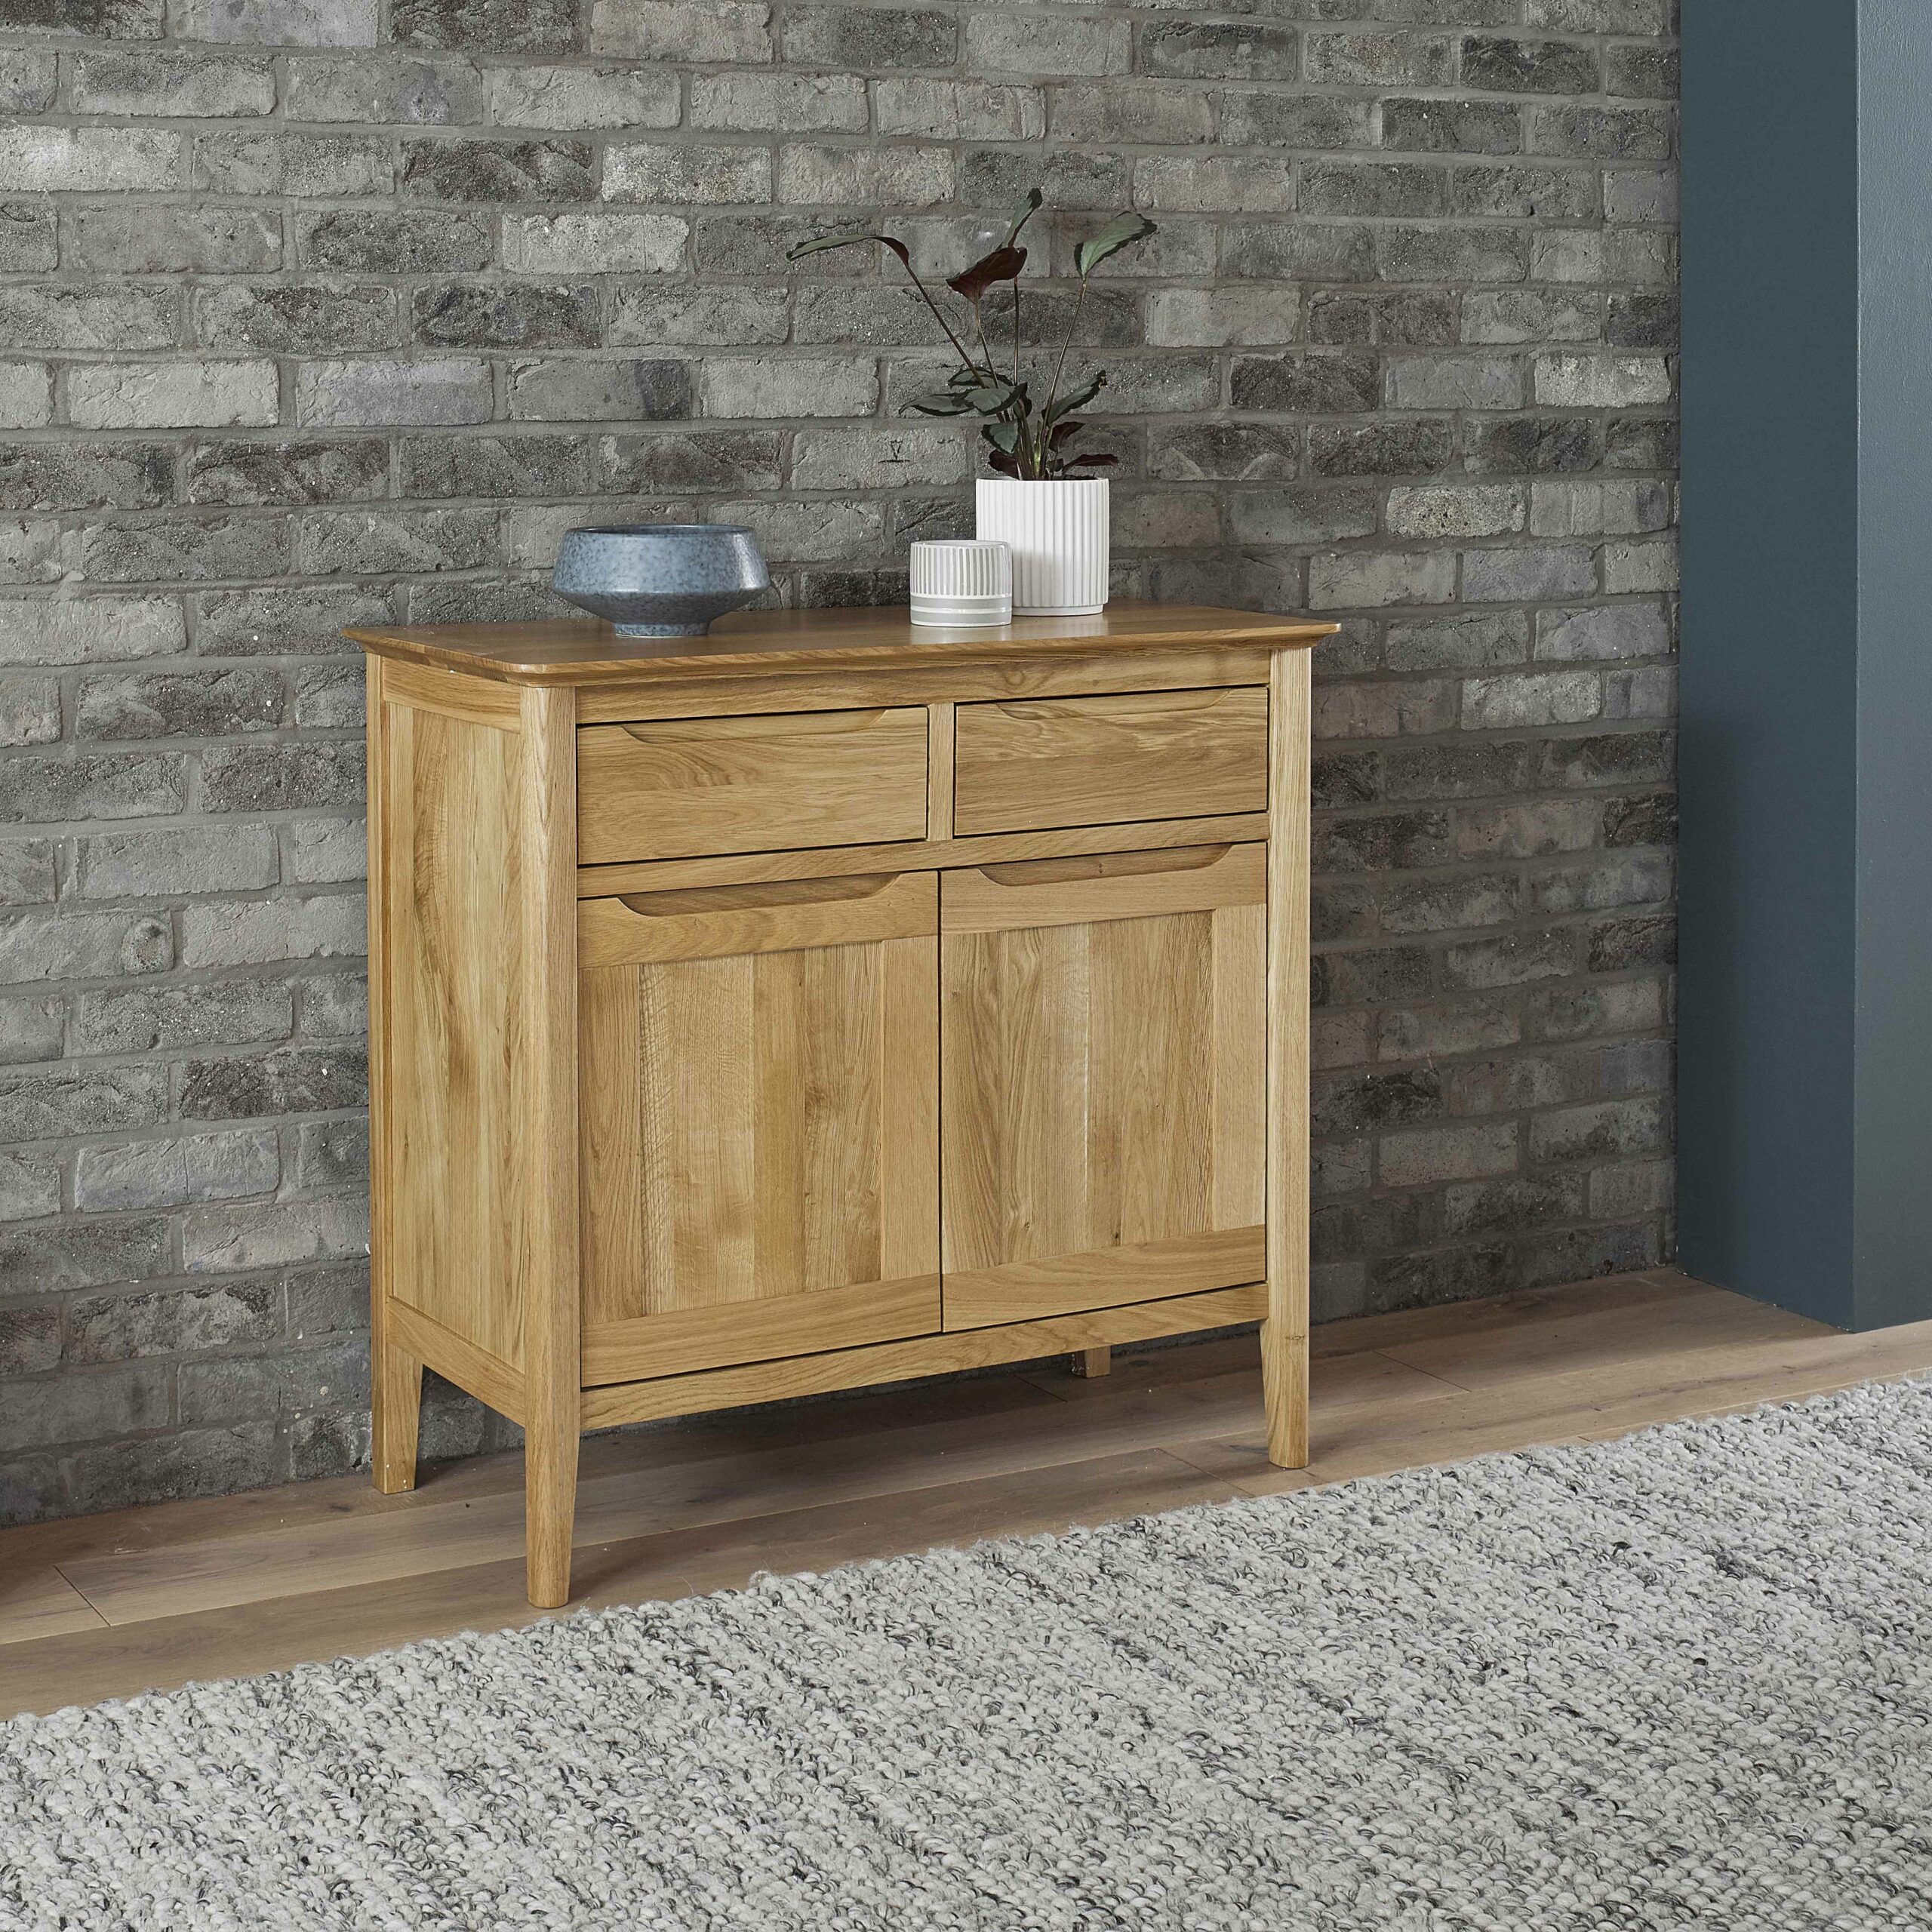 18 Ways To Style Your Sideboard by Oak Furnitureland | The Oak ...